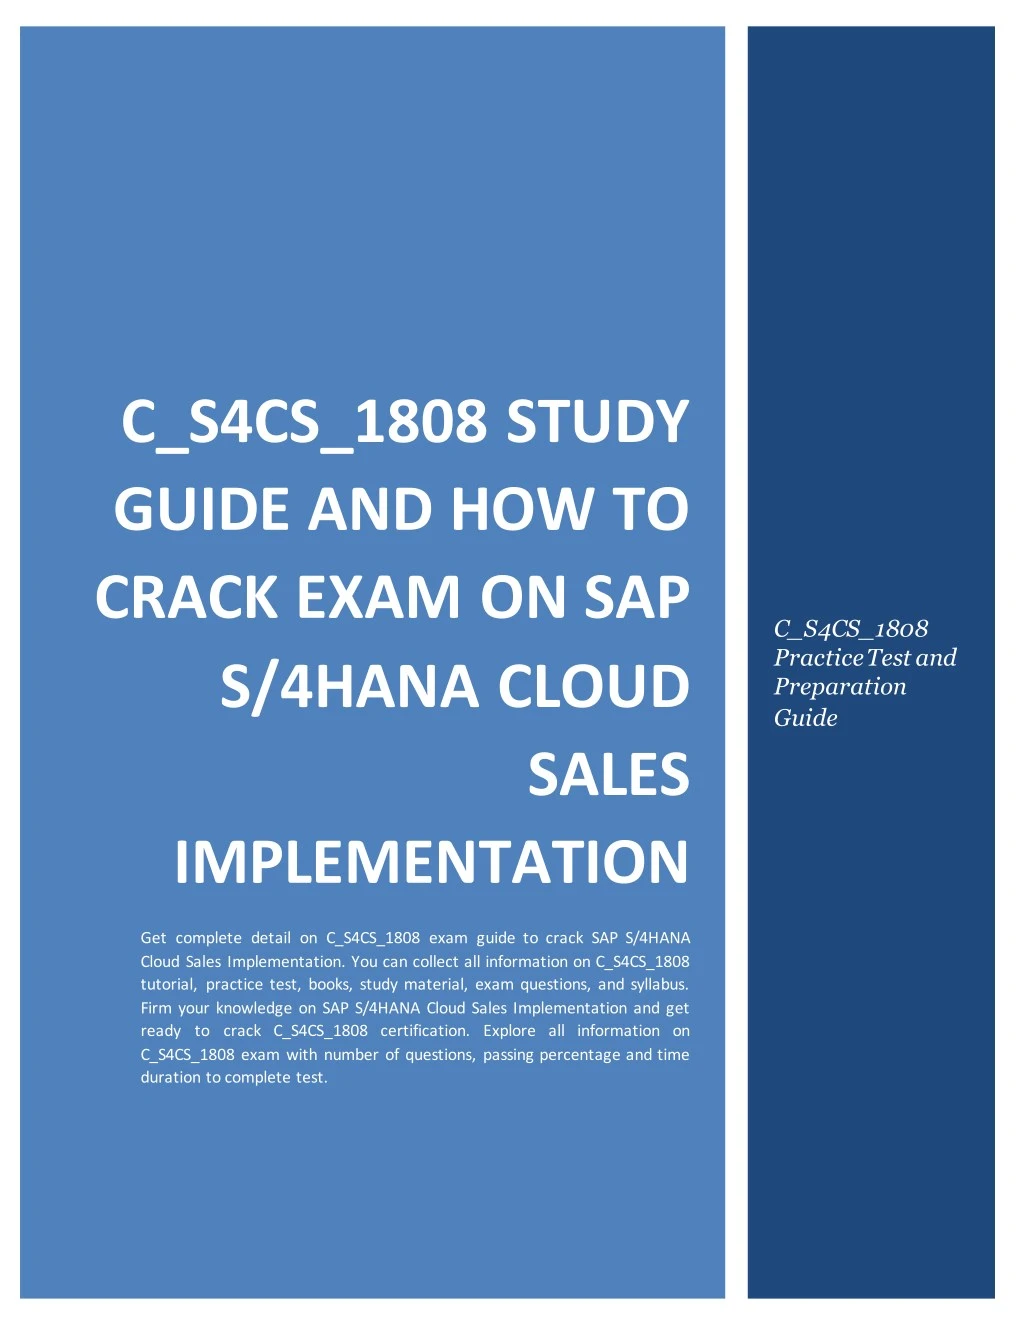 c s4cs 1808 study guide and how to crack exam